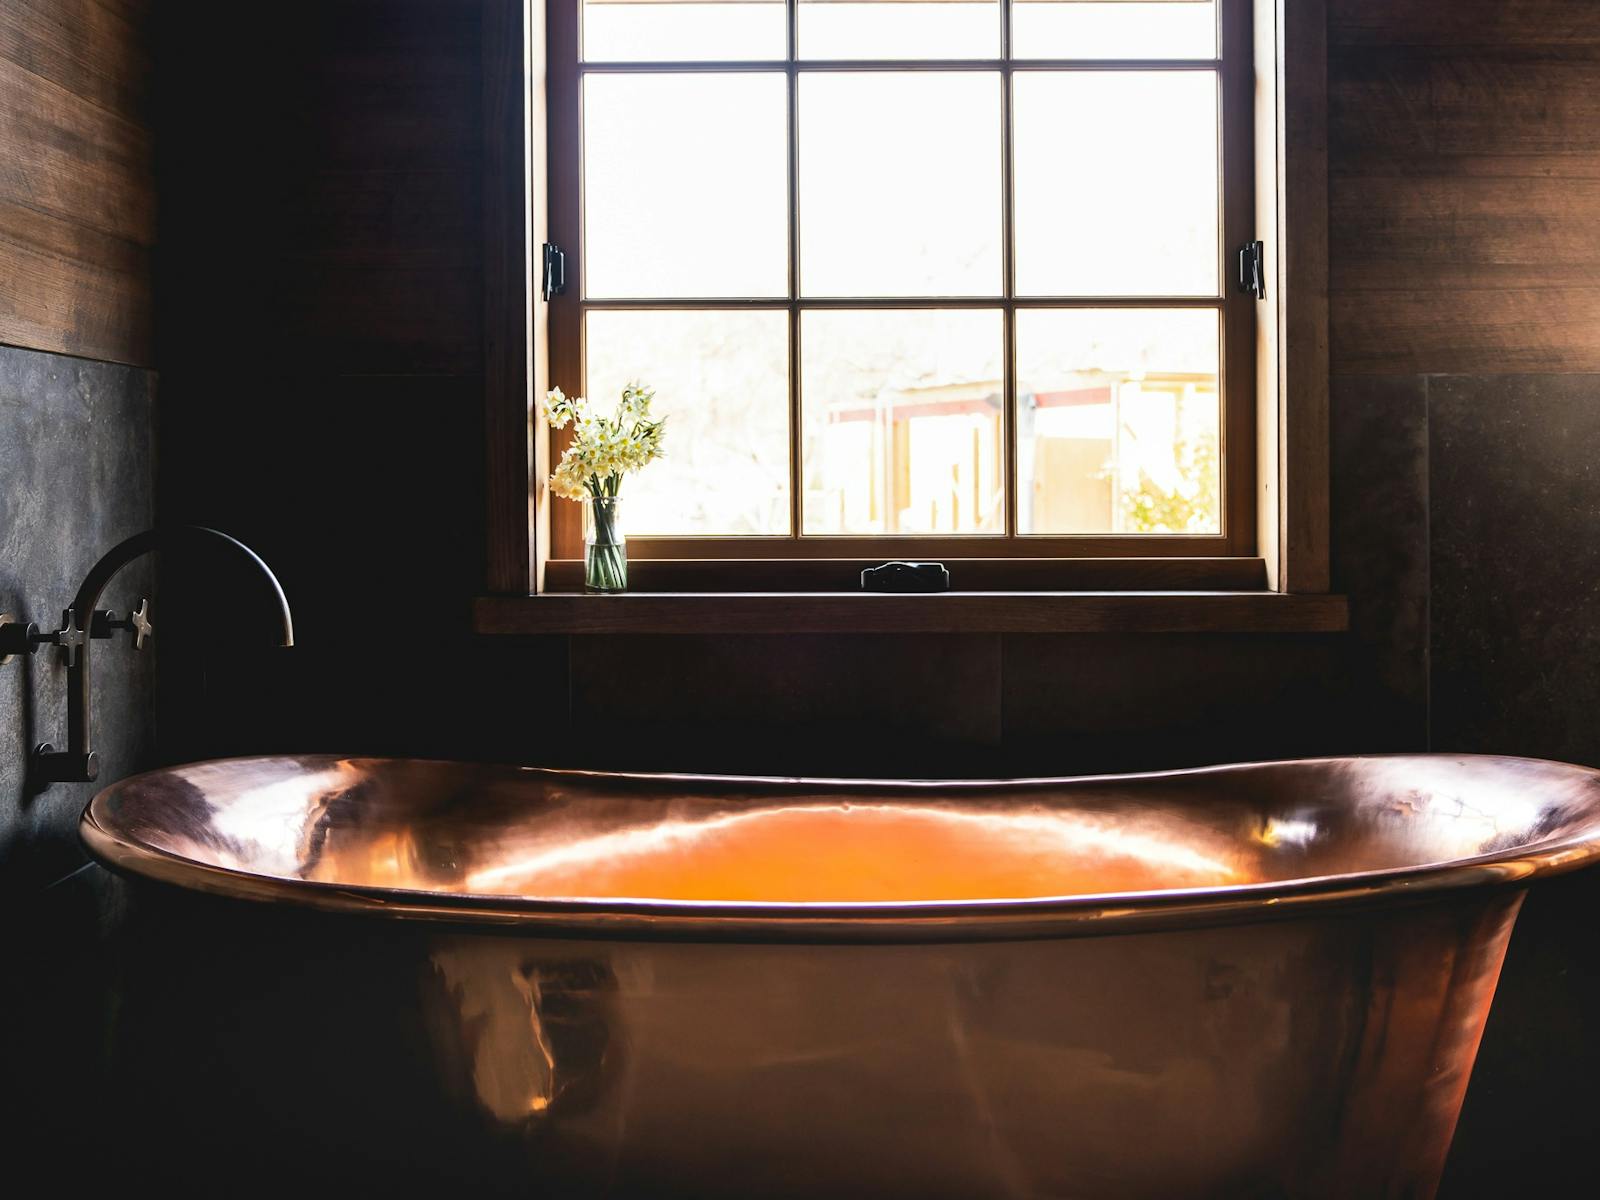 Experience the deep copper bath with views to Mount Wellington under a retractable veranda roof roof